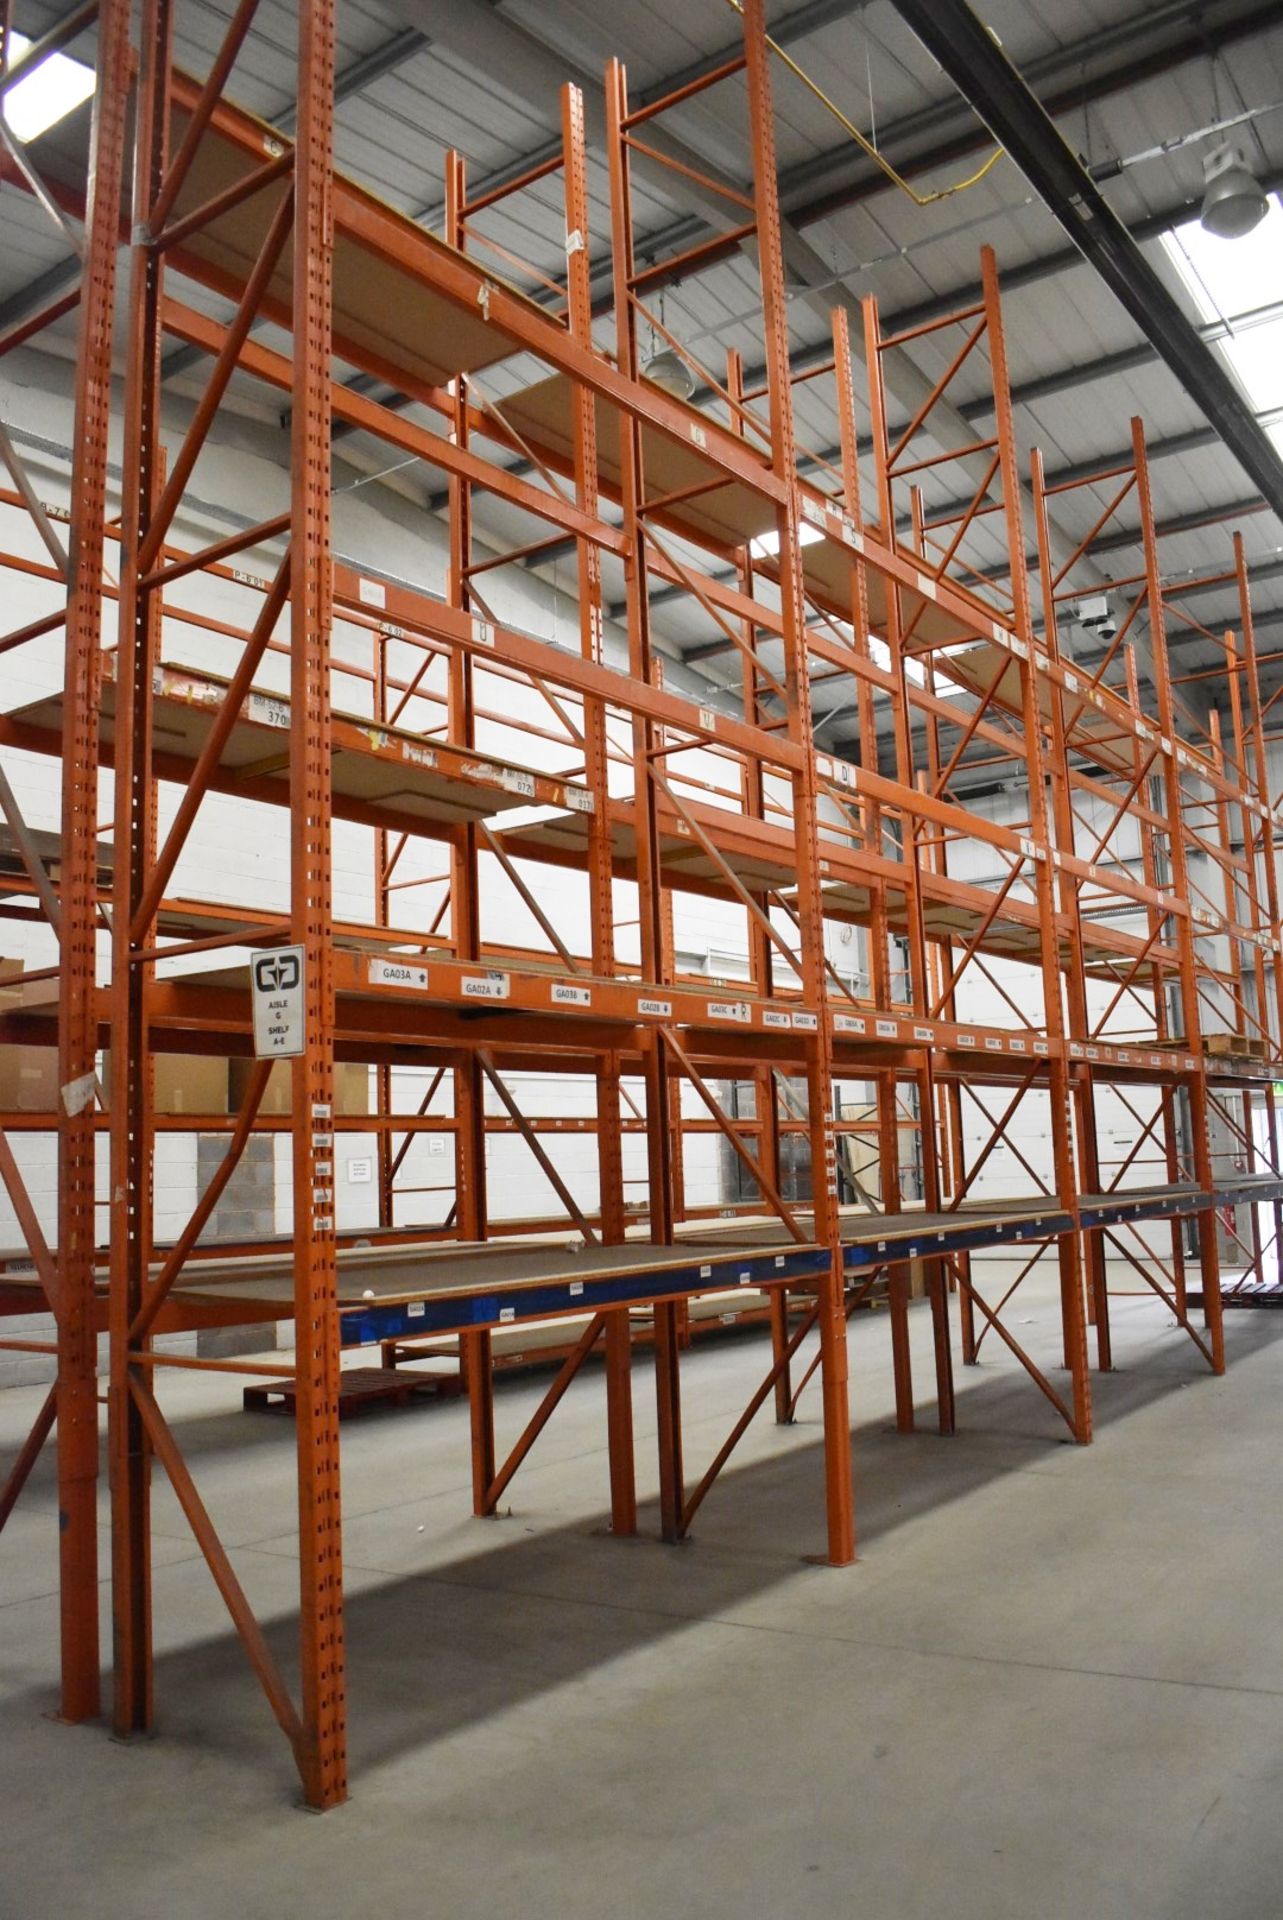 5 x Bays of RediRack Warehouse Pallet Racking - Lot Includes 6 x Uprights and 36 x Crossbeams - - Image 3 of 8